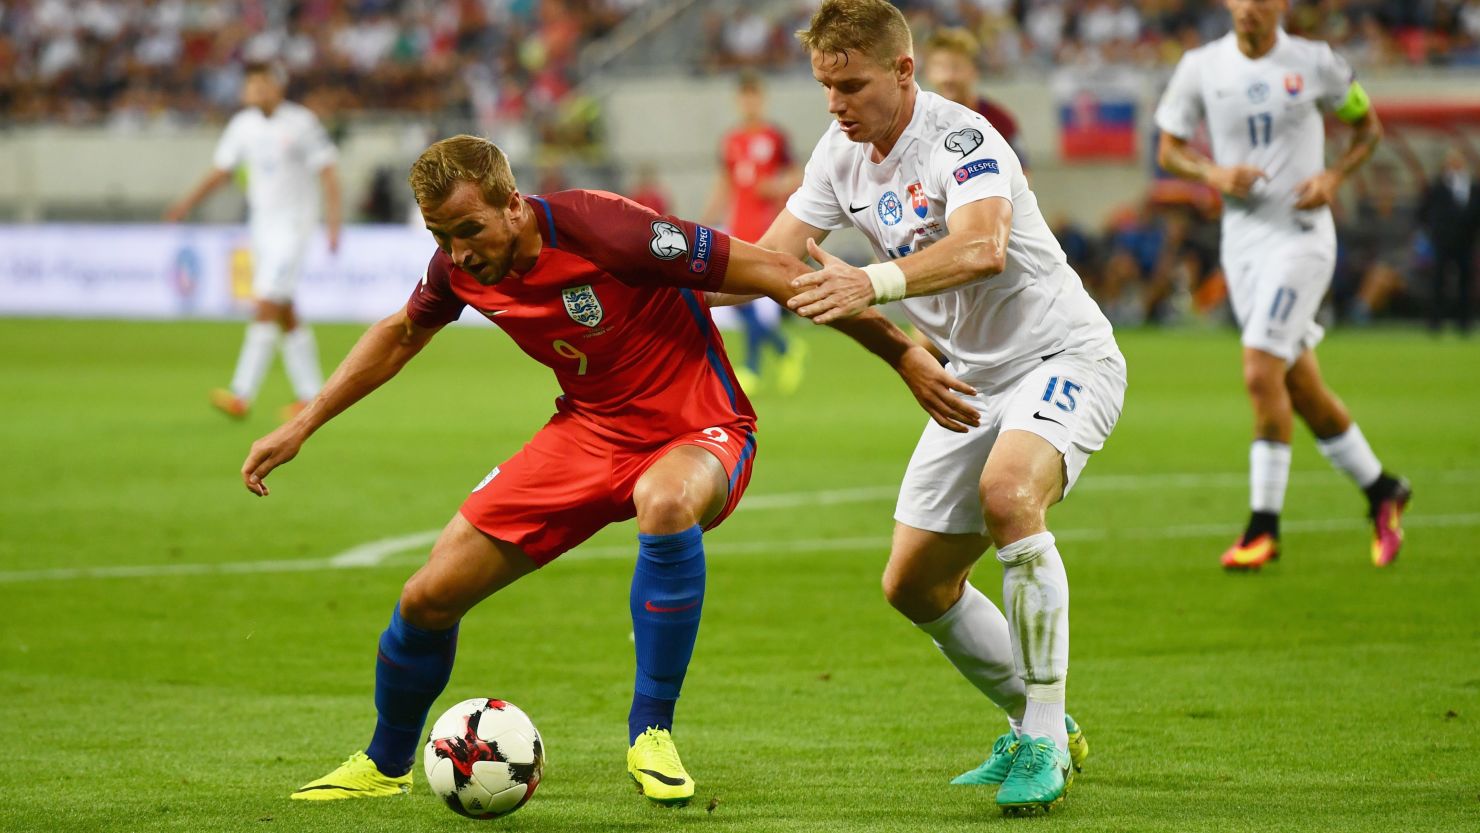 Harry Kane of England holds off Tomas Hubocan of Slovakia during the World Cup Group F qualifying match.